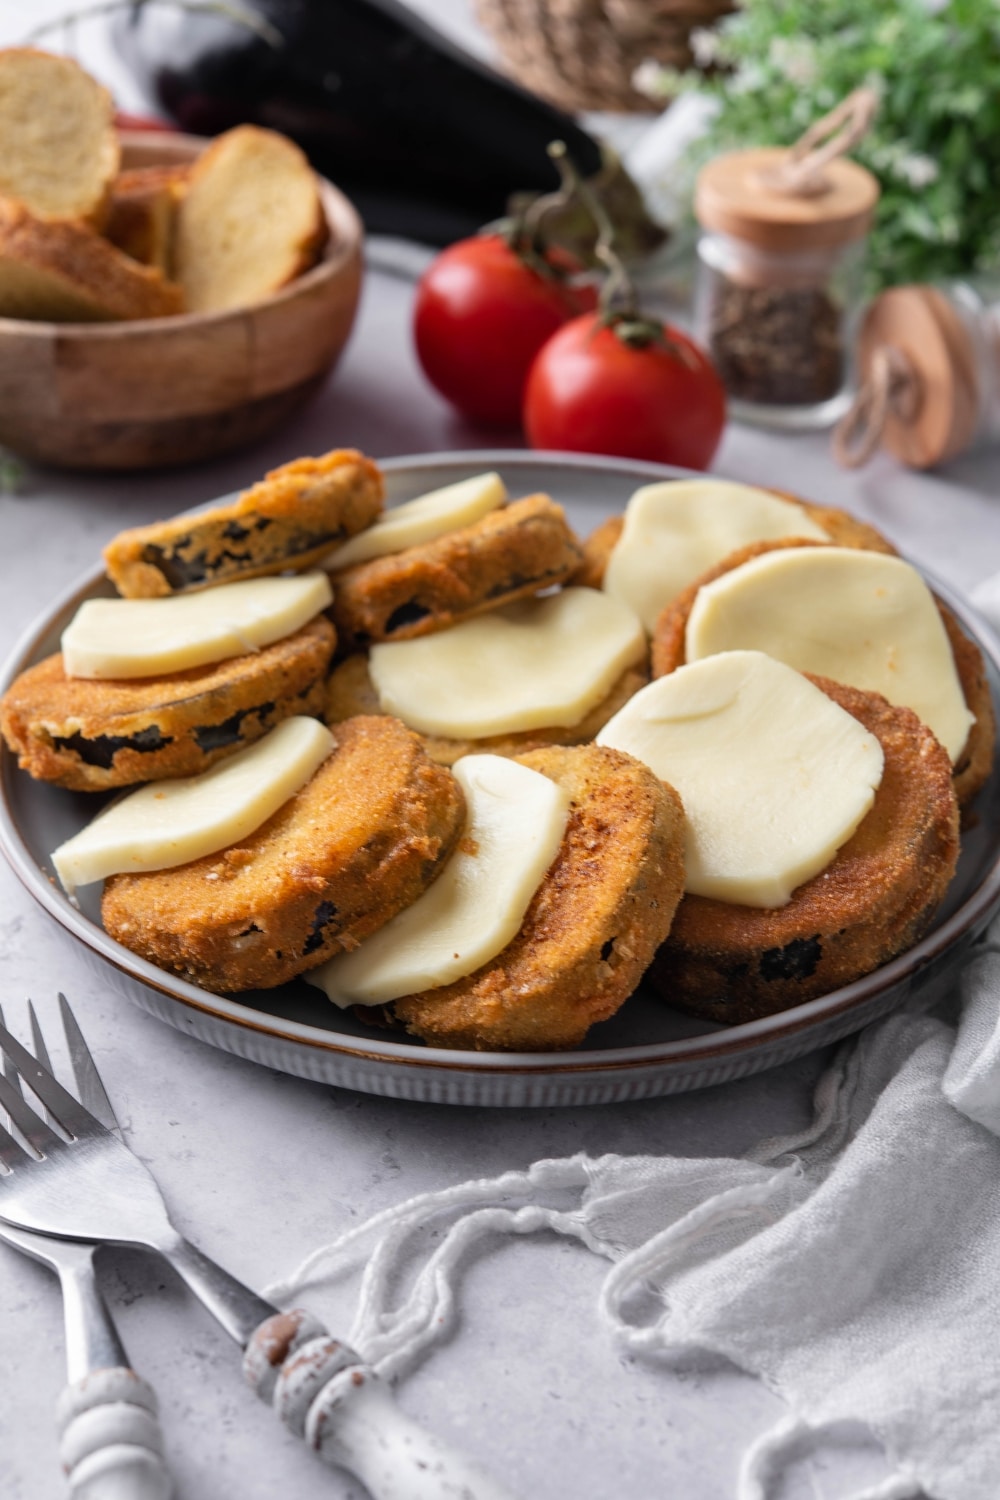 A plate of fried eggplant slices layered with mozzarella cheese slices.